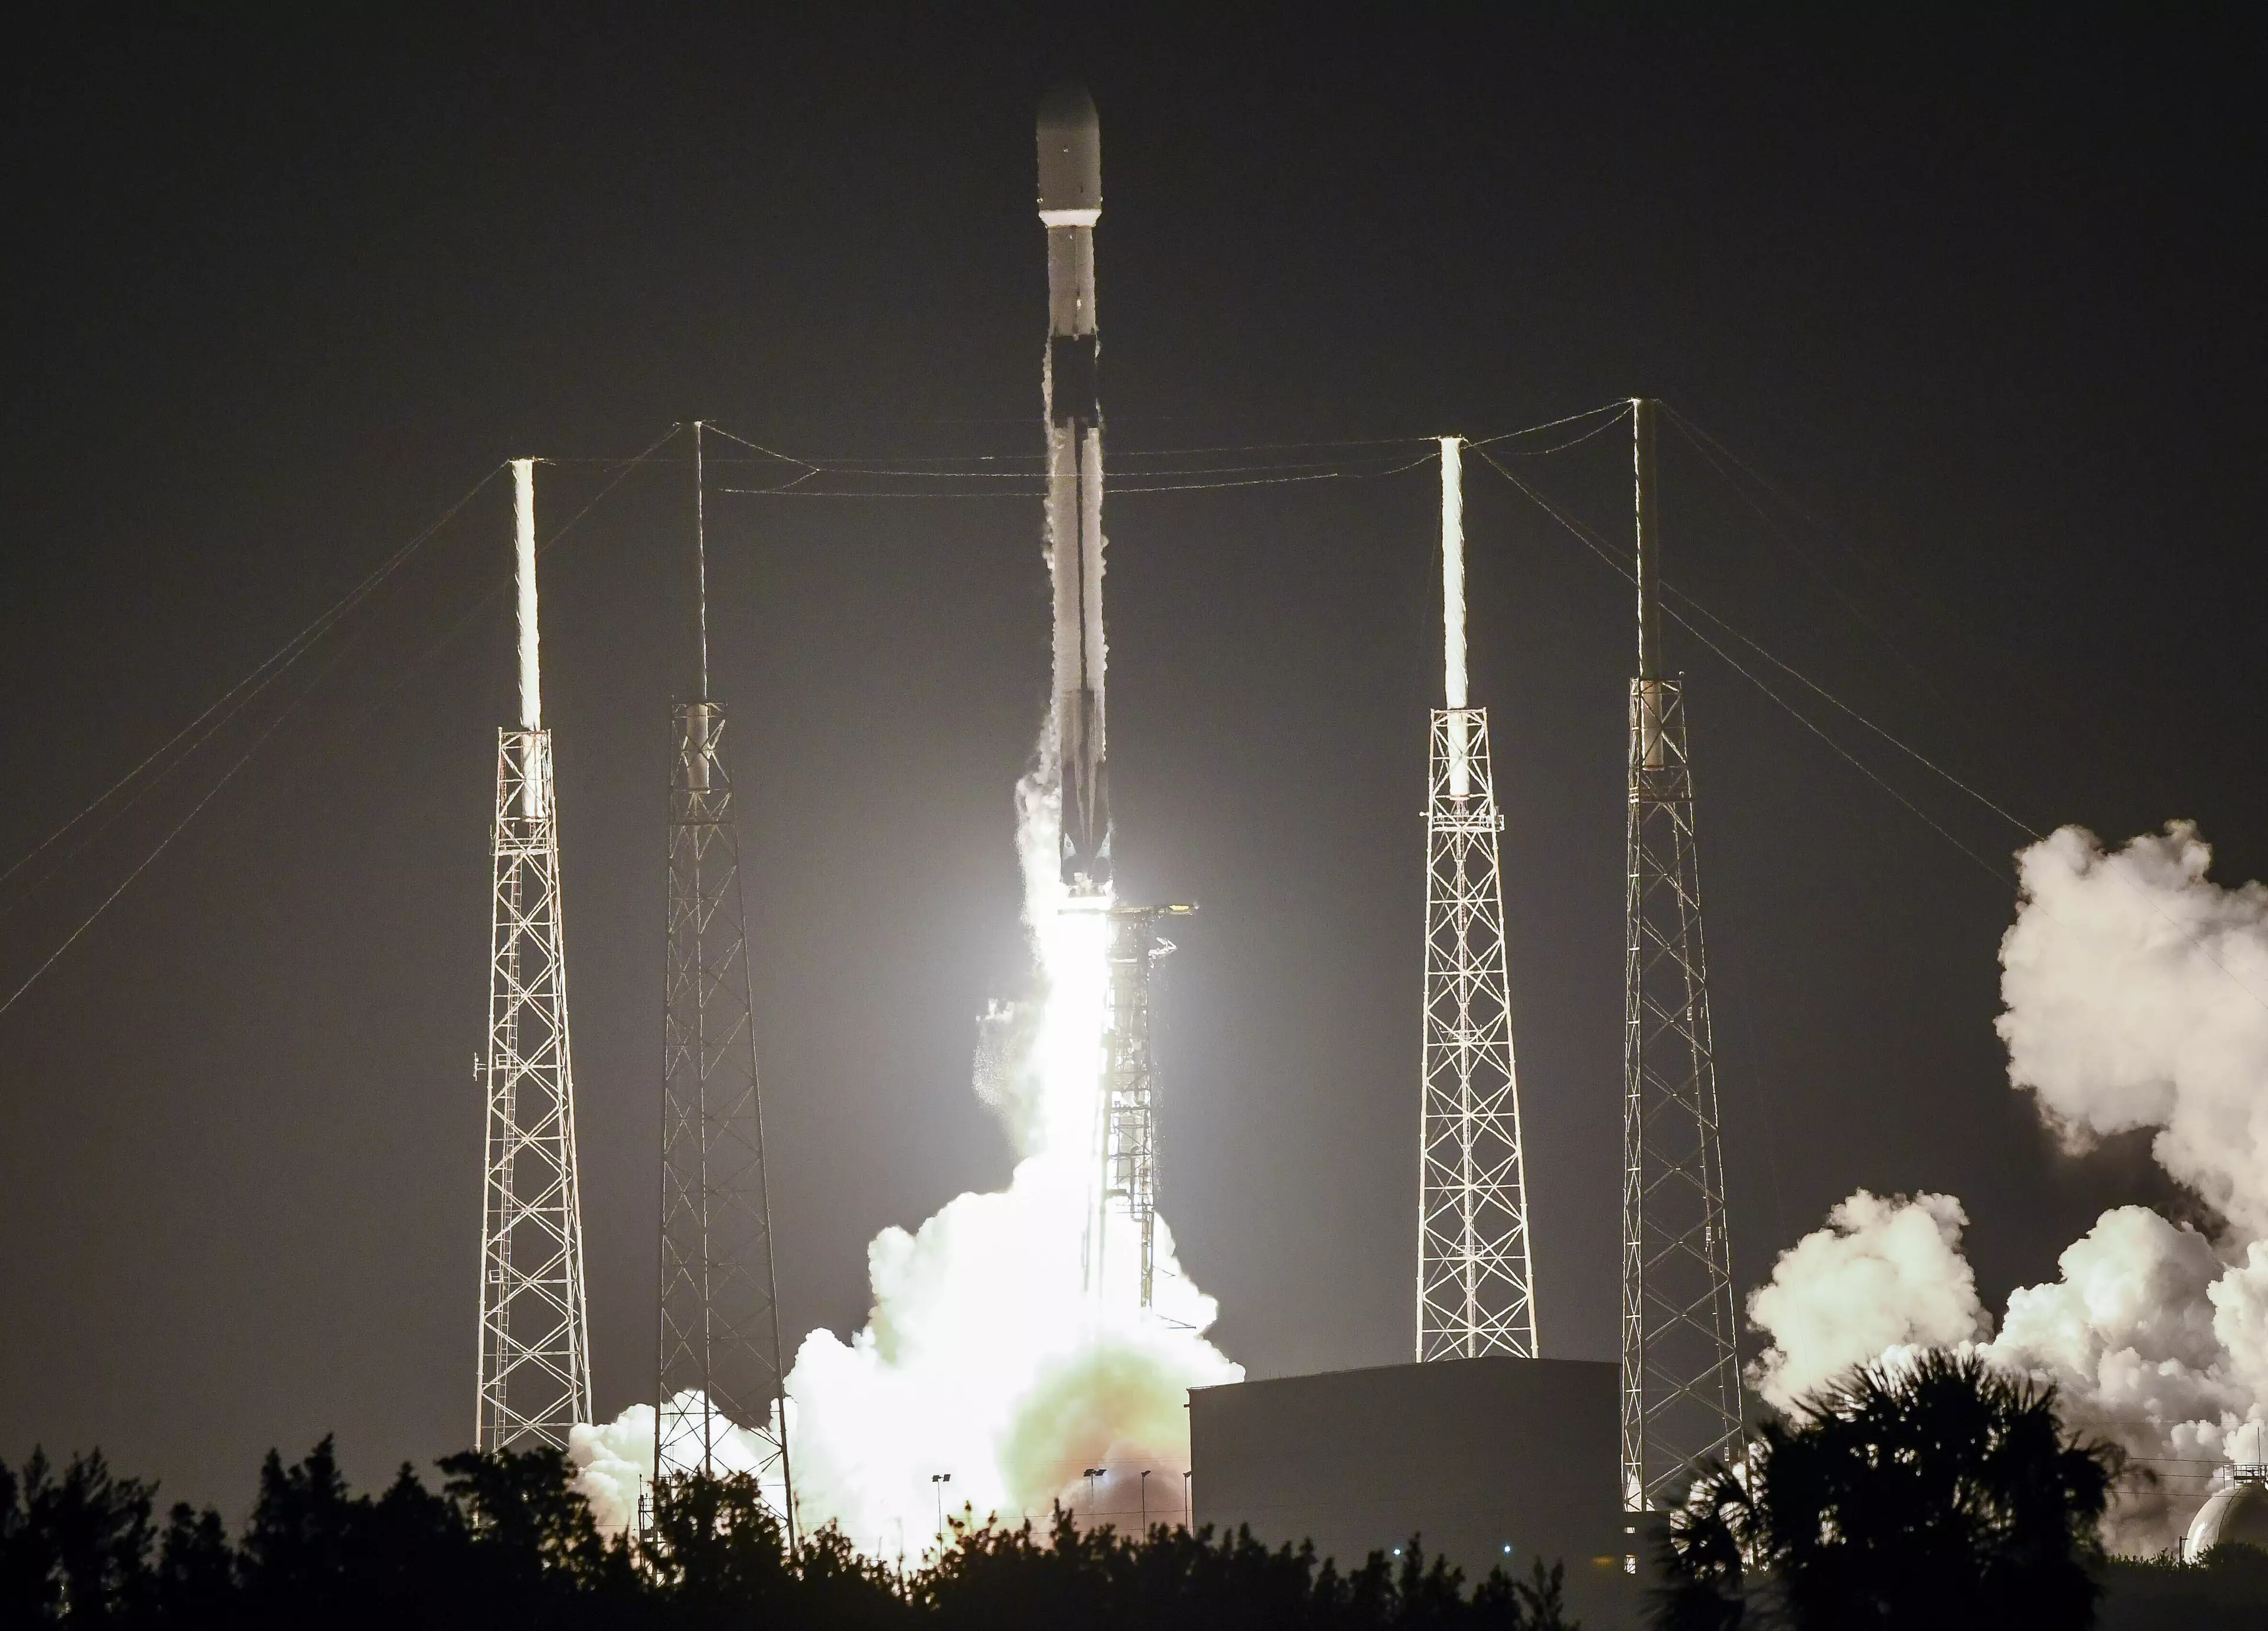 The latest batch of 60 starlink satellites were launched from Cape Canaveral yesterday.